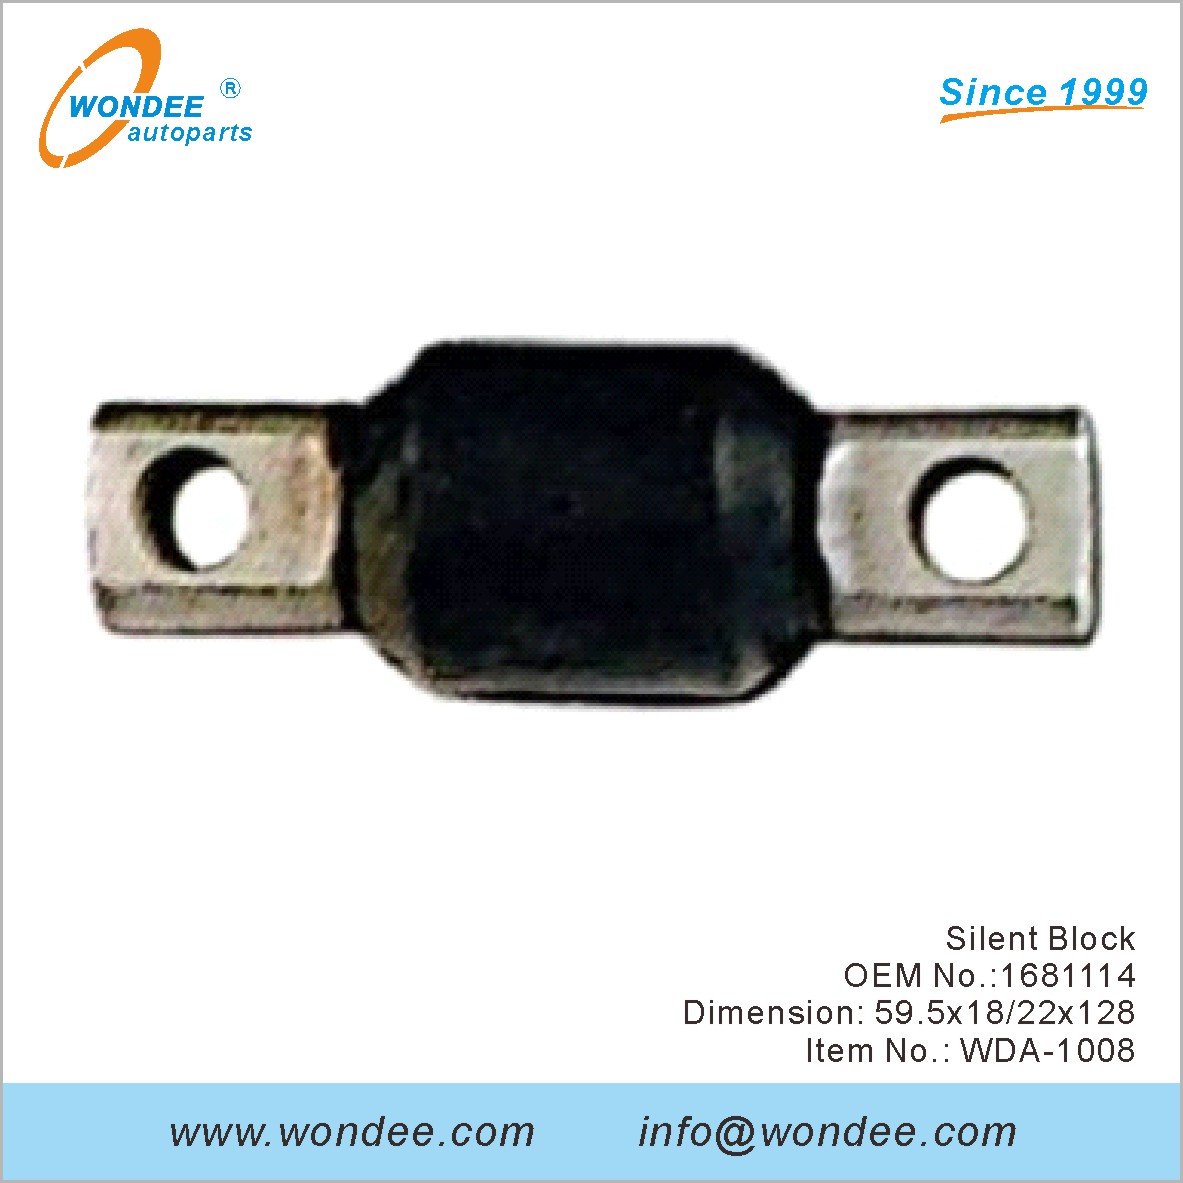 Silent Block OEM 1681114 for DAF from WONDEE